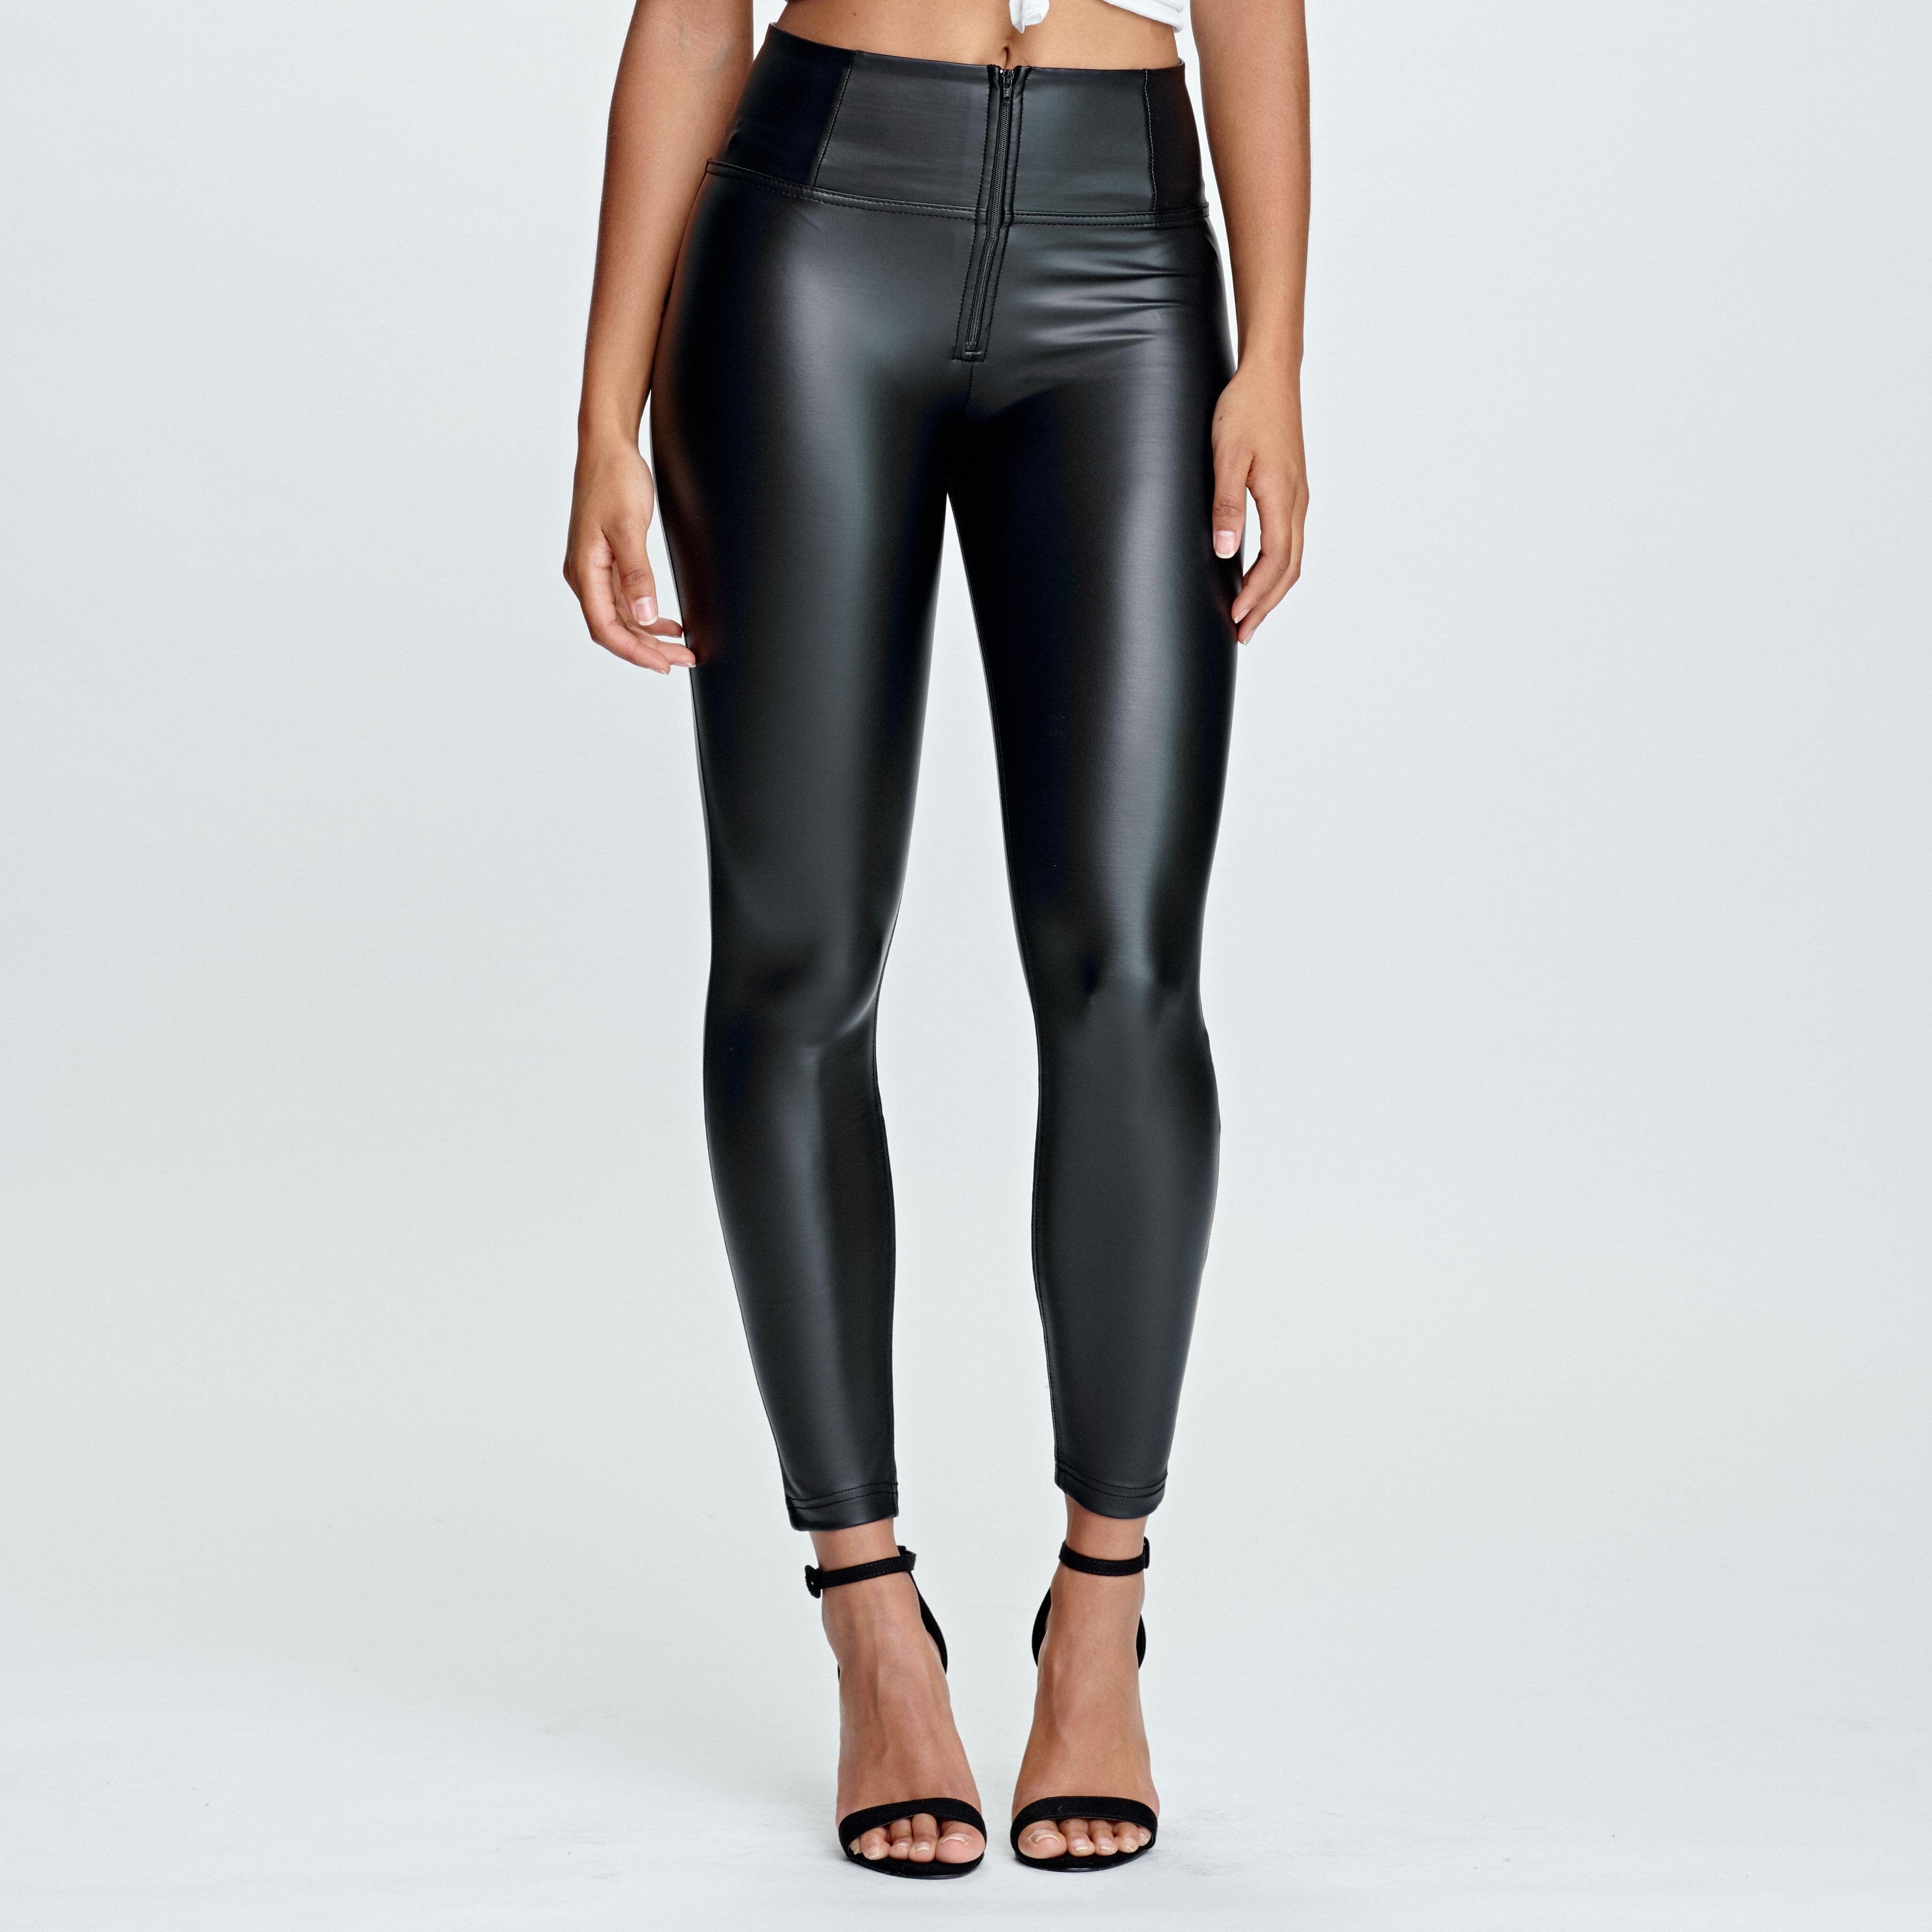 WR.UP® Faux Leather - High Waisted - Petite Length - Black 2